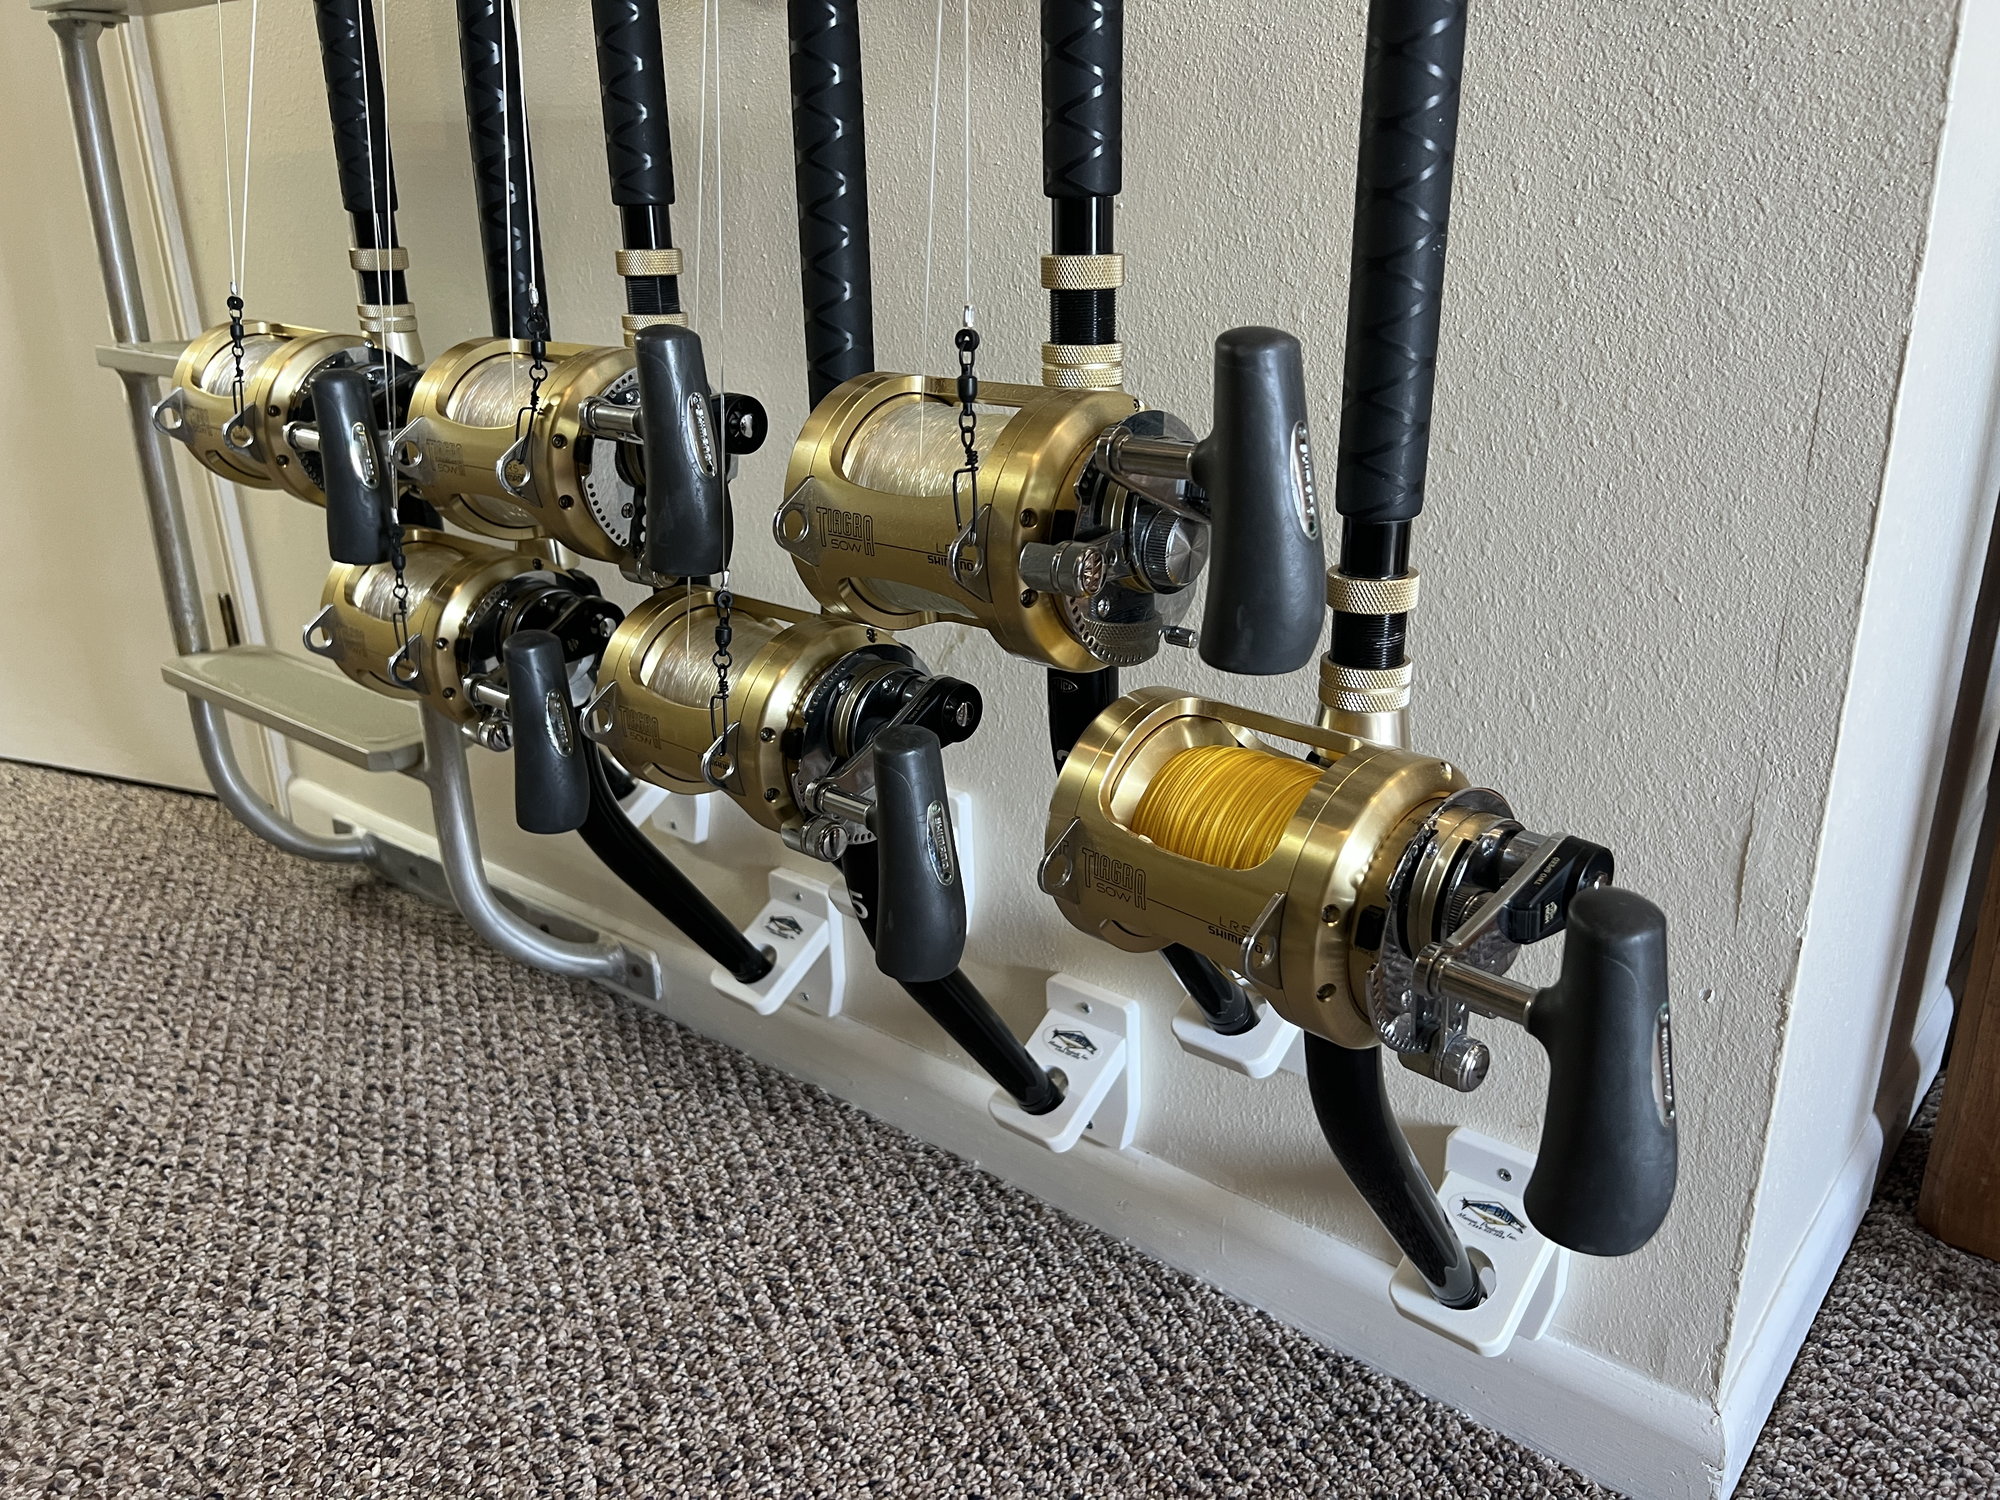 Rod holder ideas for pickup - The Hull Truth - Boating and Fishing Forum